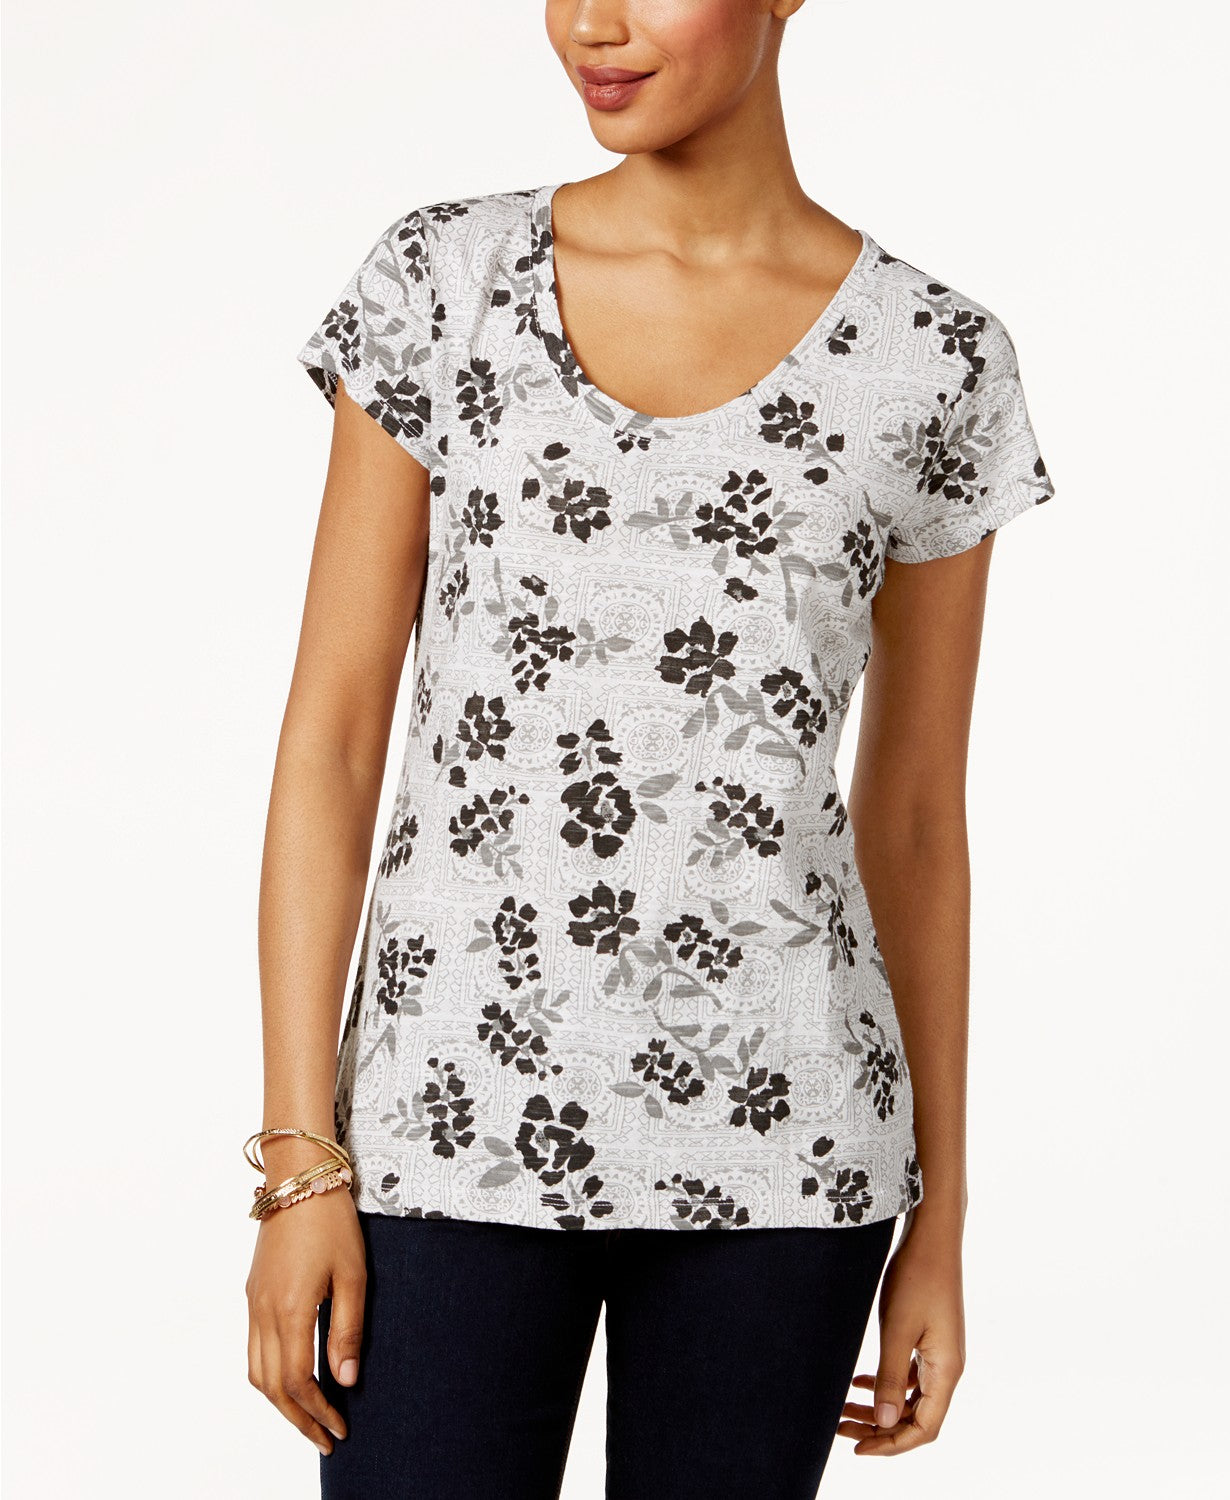 Style Co Cotton Printed T-Shirt Neutral S